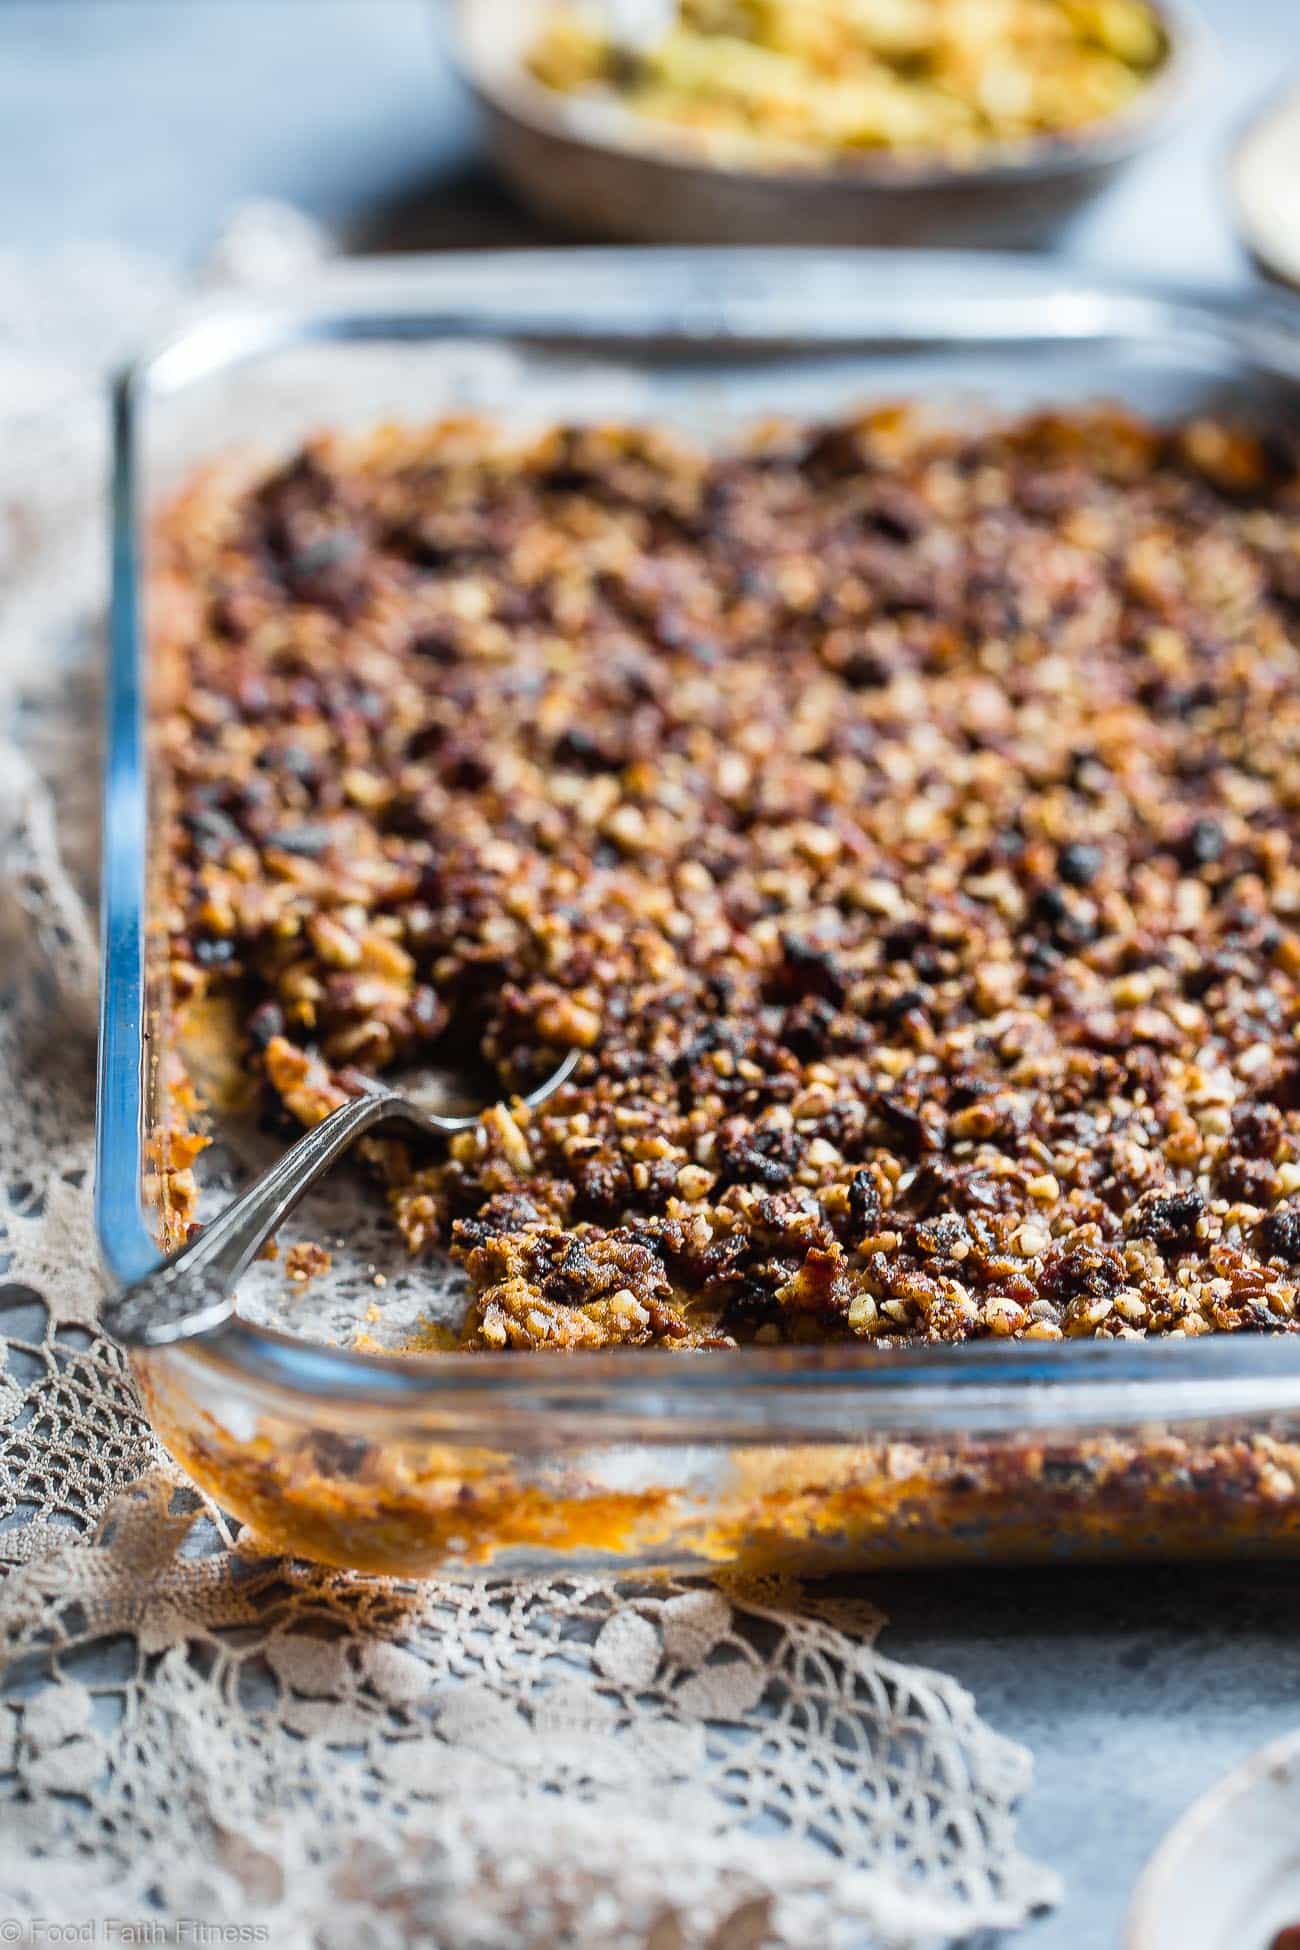 Paleo Easy Healthy Sweet Potato Casserole with Pecan Topping - the best sweet potato casserole for Thanksgiving! No one will believe it's vegan friendly, whole30 compliant and gluten/grain/dairy/sugar AND egg free! | Foodfaithfitness.com | @FoodFaithFit